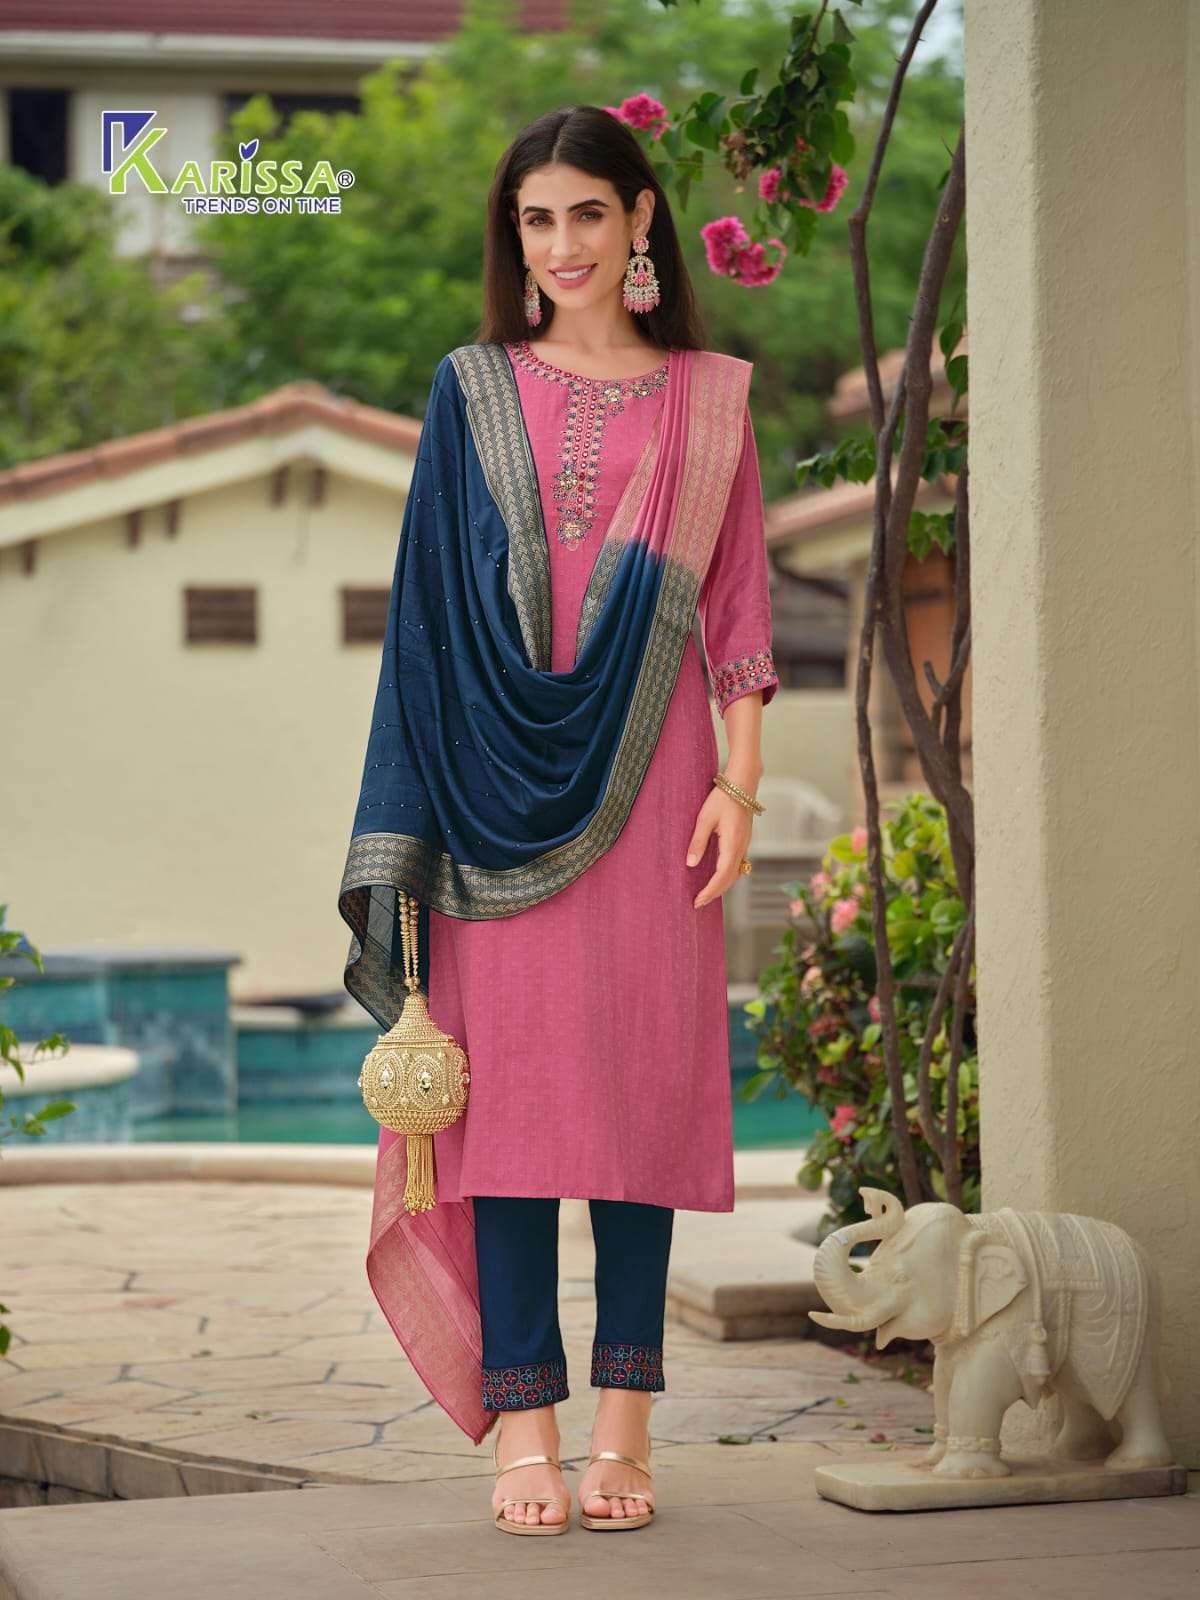 Nora By Karissa 9001 To 9006 Series Beautiful Sharara Suits Colorful Stylish Fancy Casual Wear & Ethnic Wear Viscose Silk Dresses At Wholesale Price